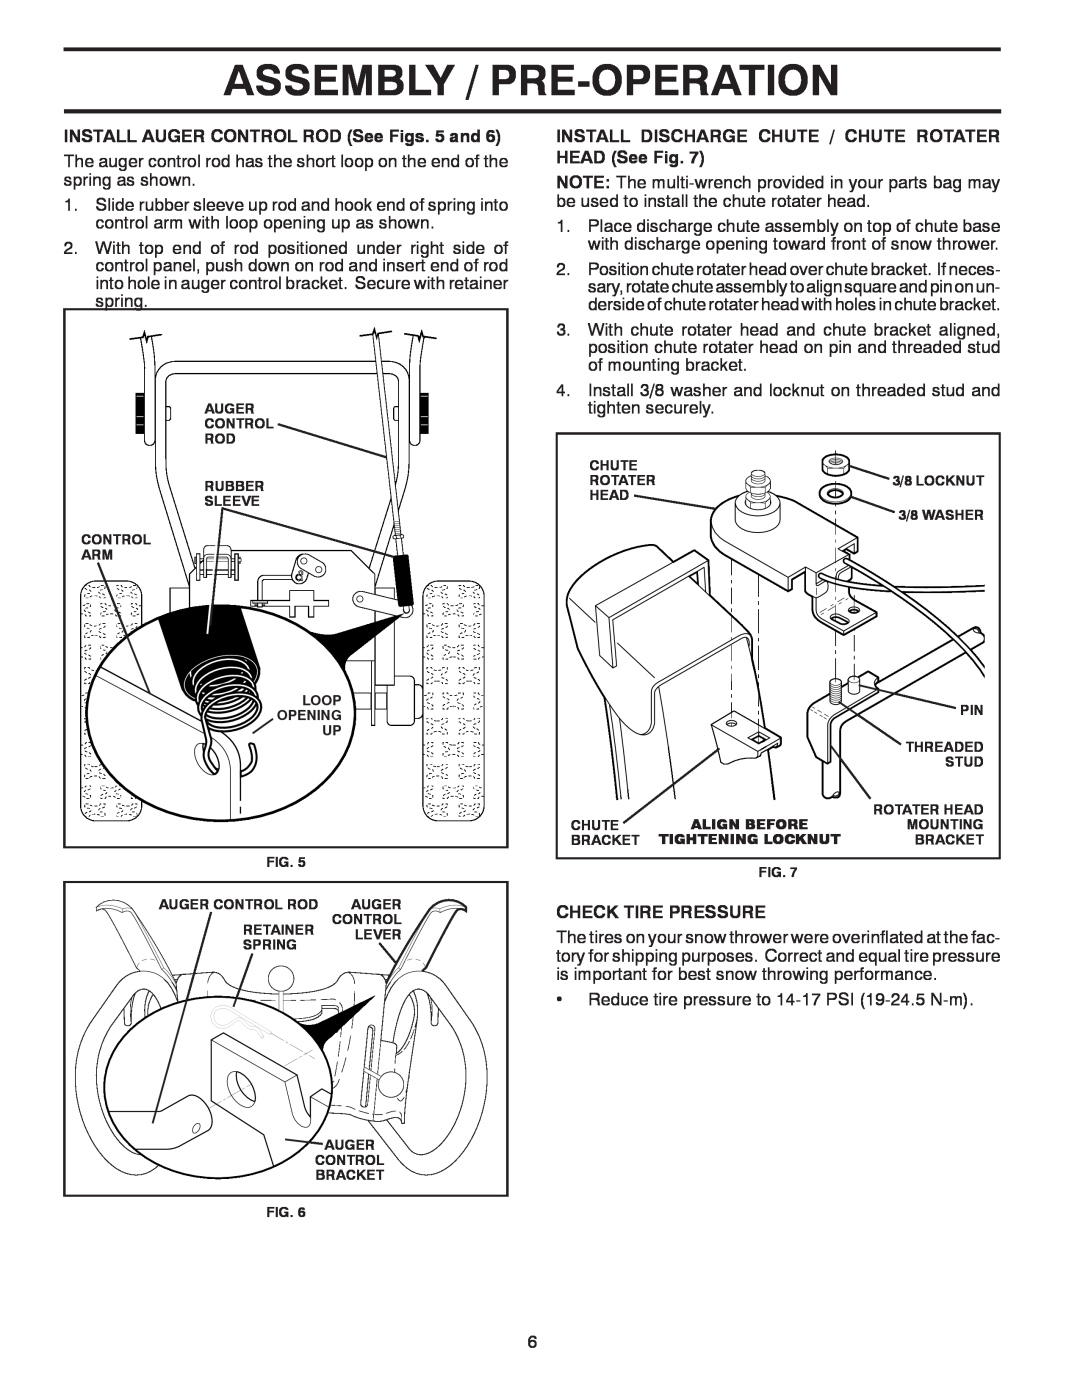 Poulan PR5524ES owner manual Assembly / Pre-Operation, INSTALL AUGER CONTROL ROD See Figs. 5 and, Check Tire Pressure 